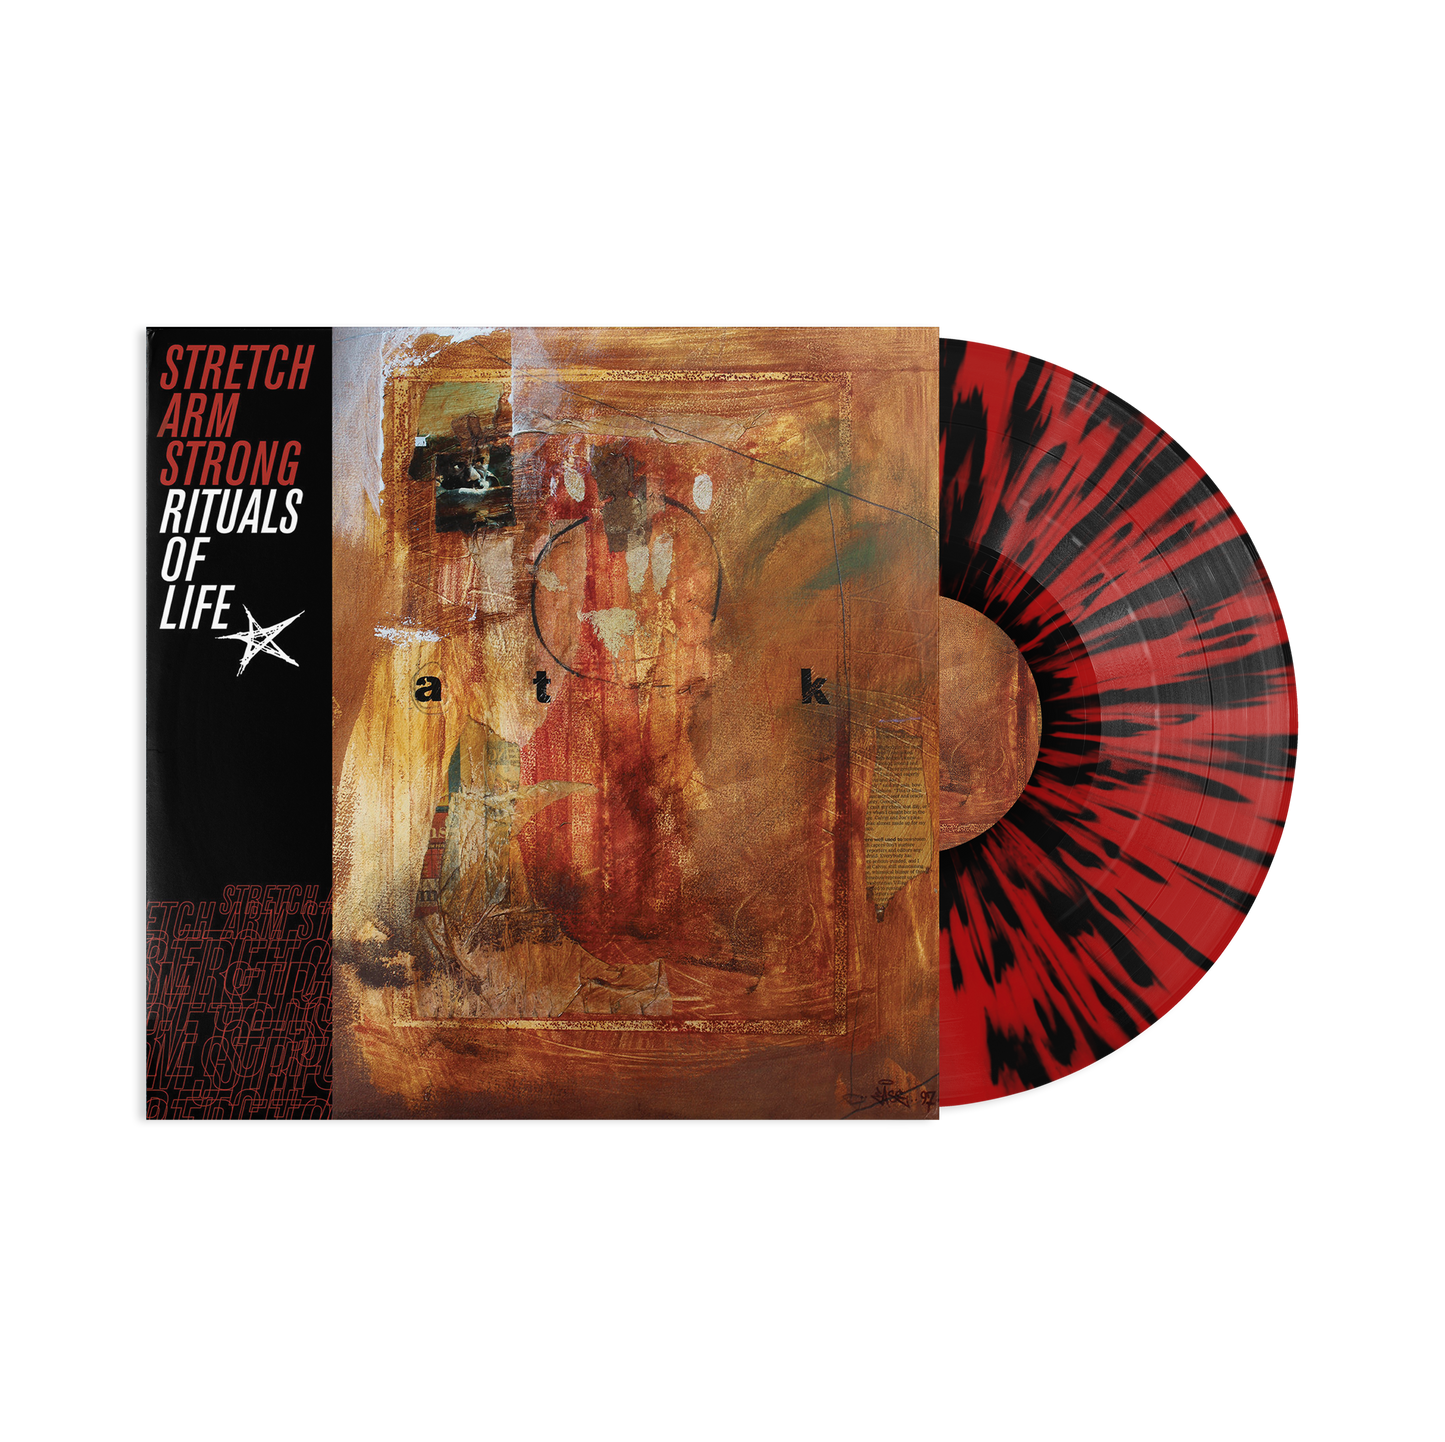 Stretch Arm Strong  "Rituals Of Life" LP